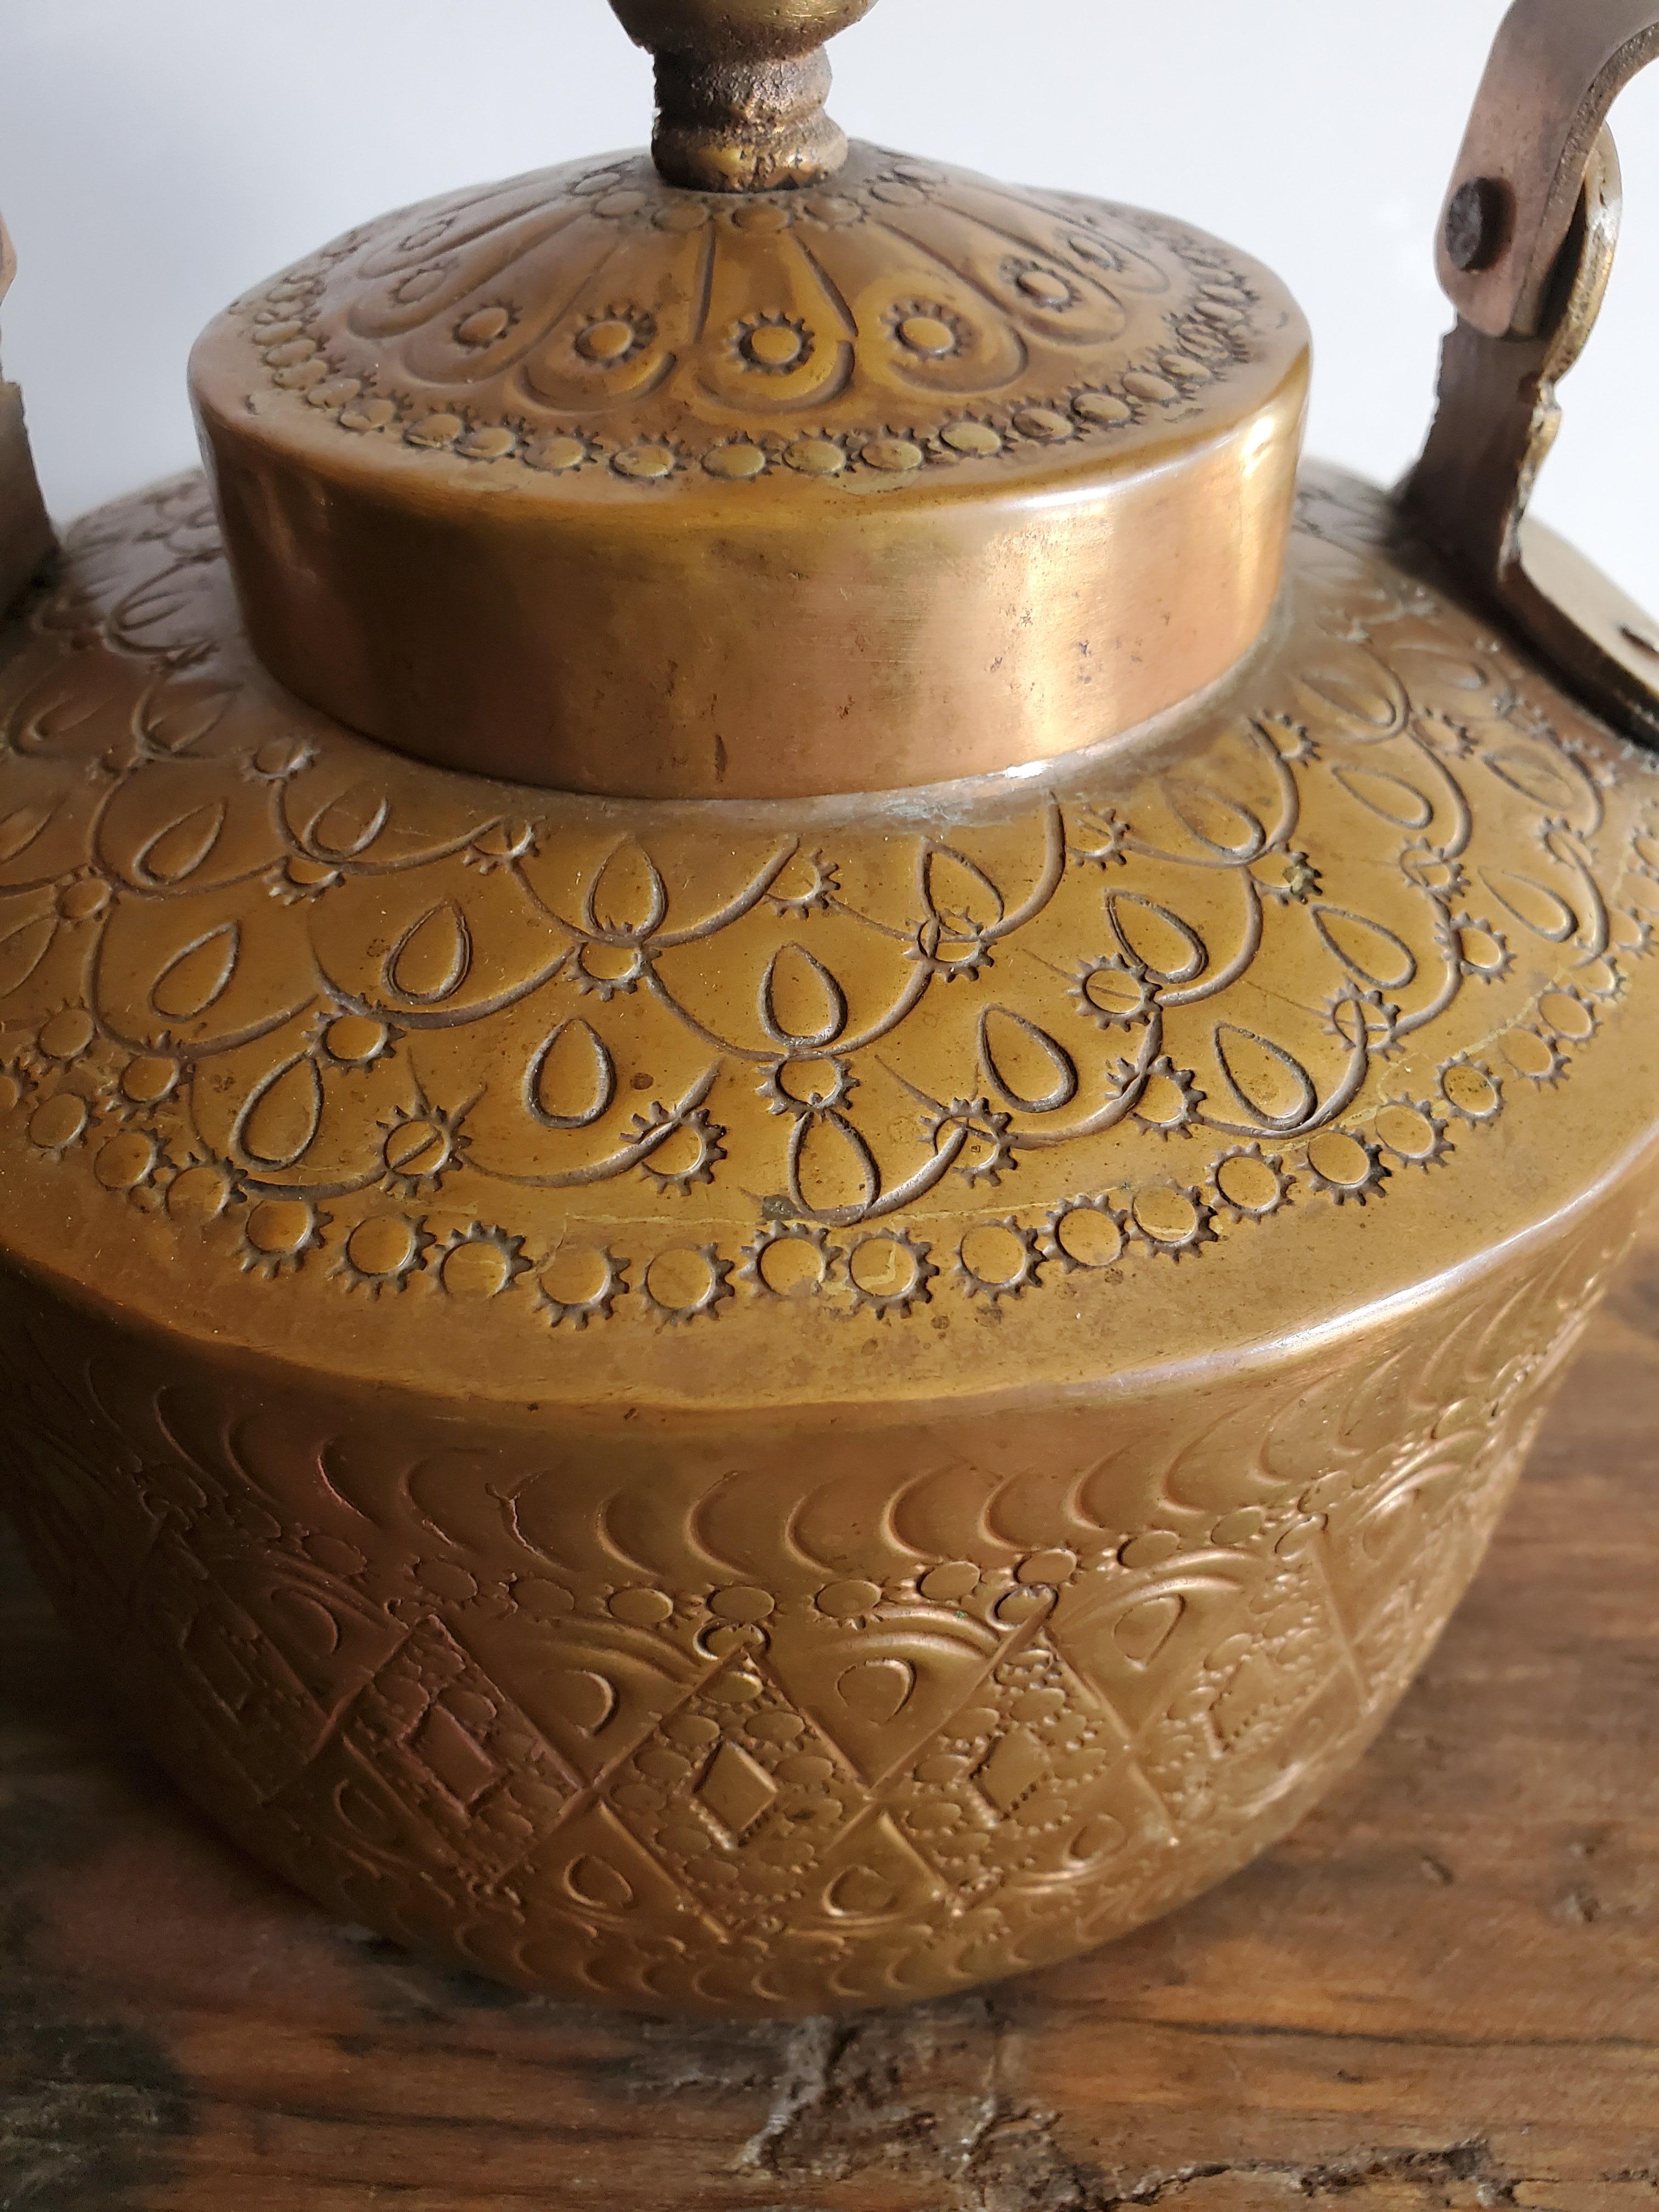 Made from pure copper, this beautiful Moroccan tea kettle is a few decades old, and has signs of wear and tear. Great for decoration with its amazing hammering patterns throughout.
Measuring approximately 9